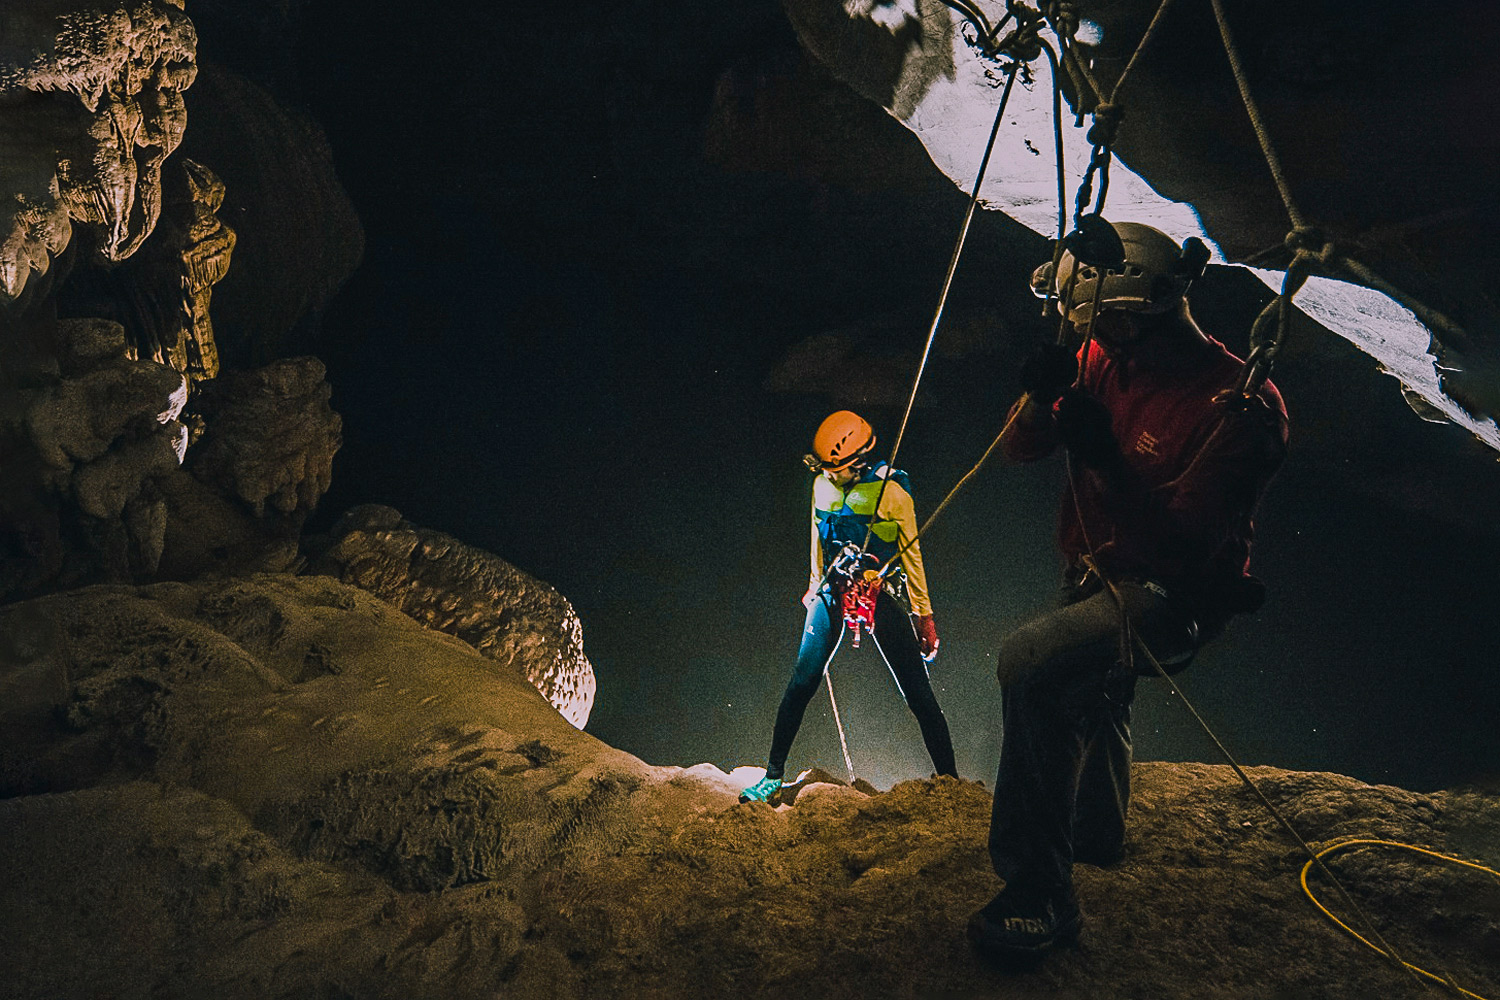 The chance to abseil from the dry branch to the water branch will enthrall visitors to Tu Lan Cave.